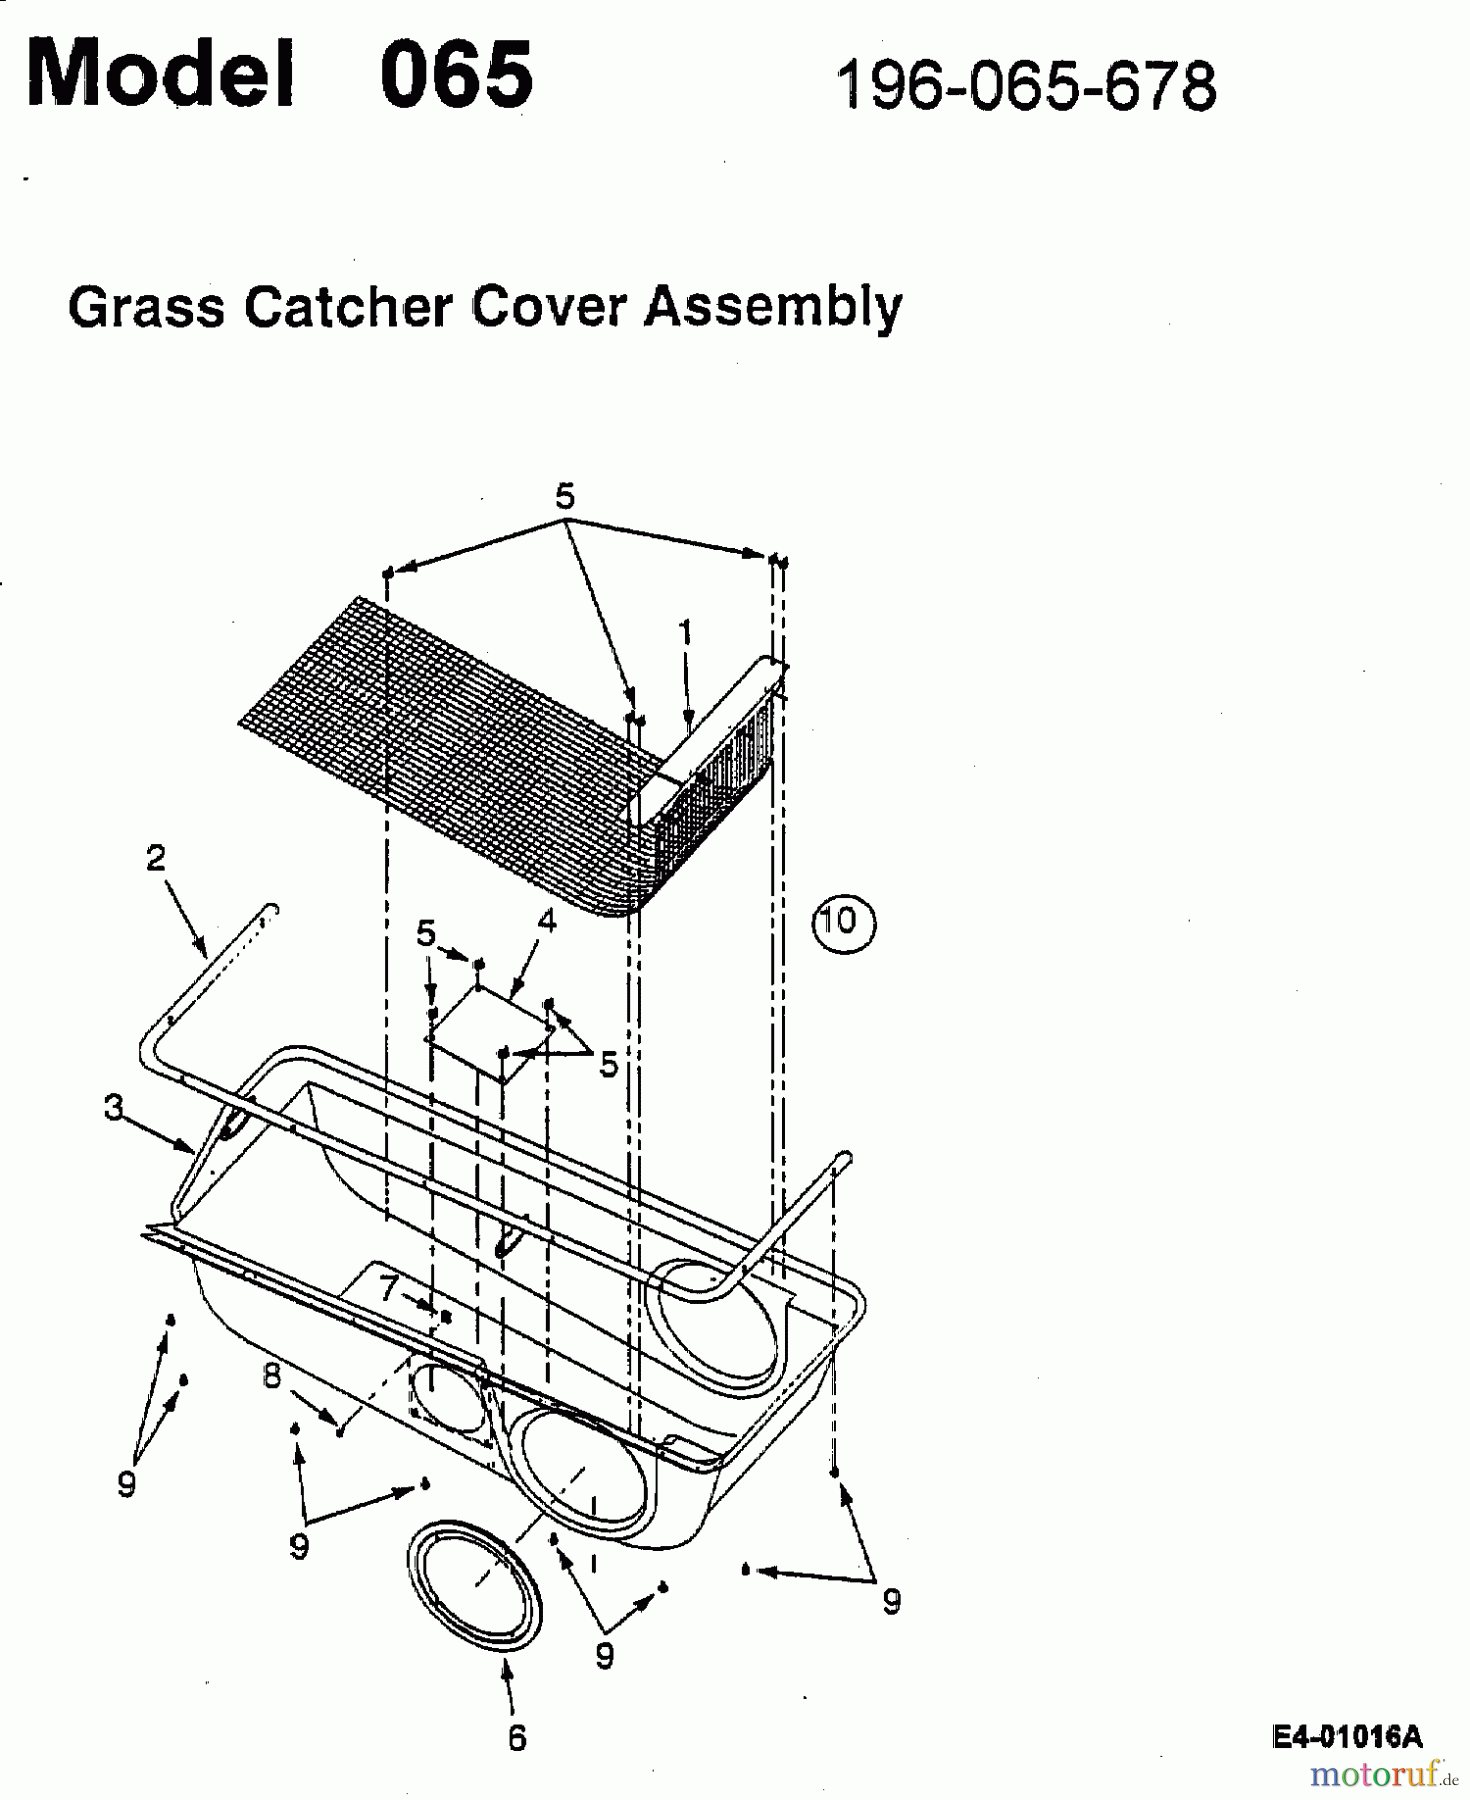  MTD Accessories Accessories garden and lawn tractors Grass catcher for 400 series 196-065-698  (2000) Cover grass bag